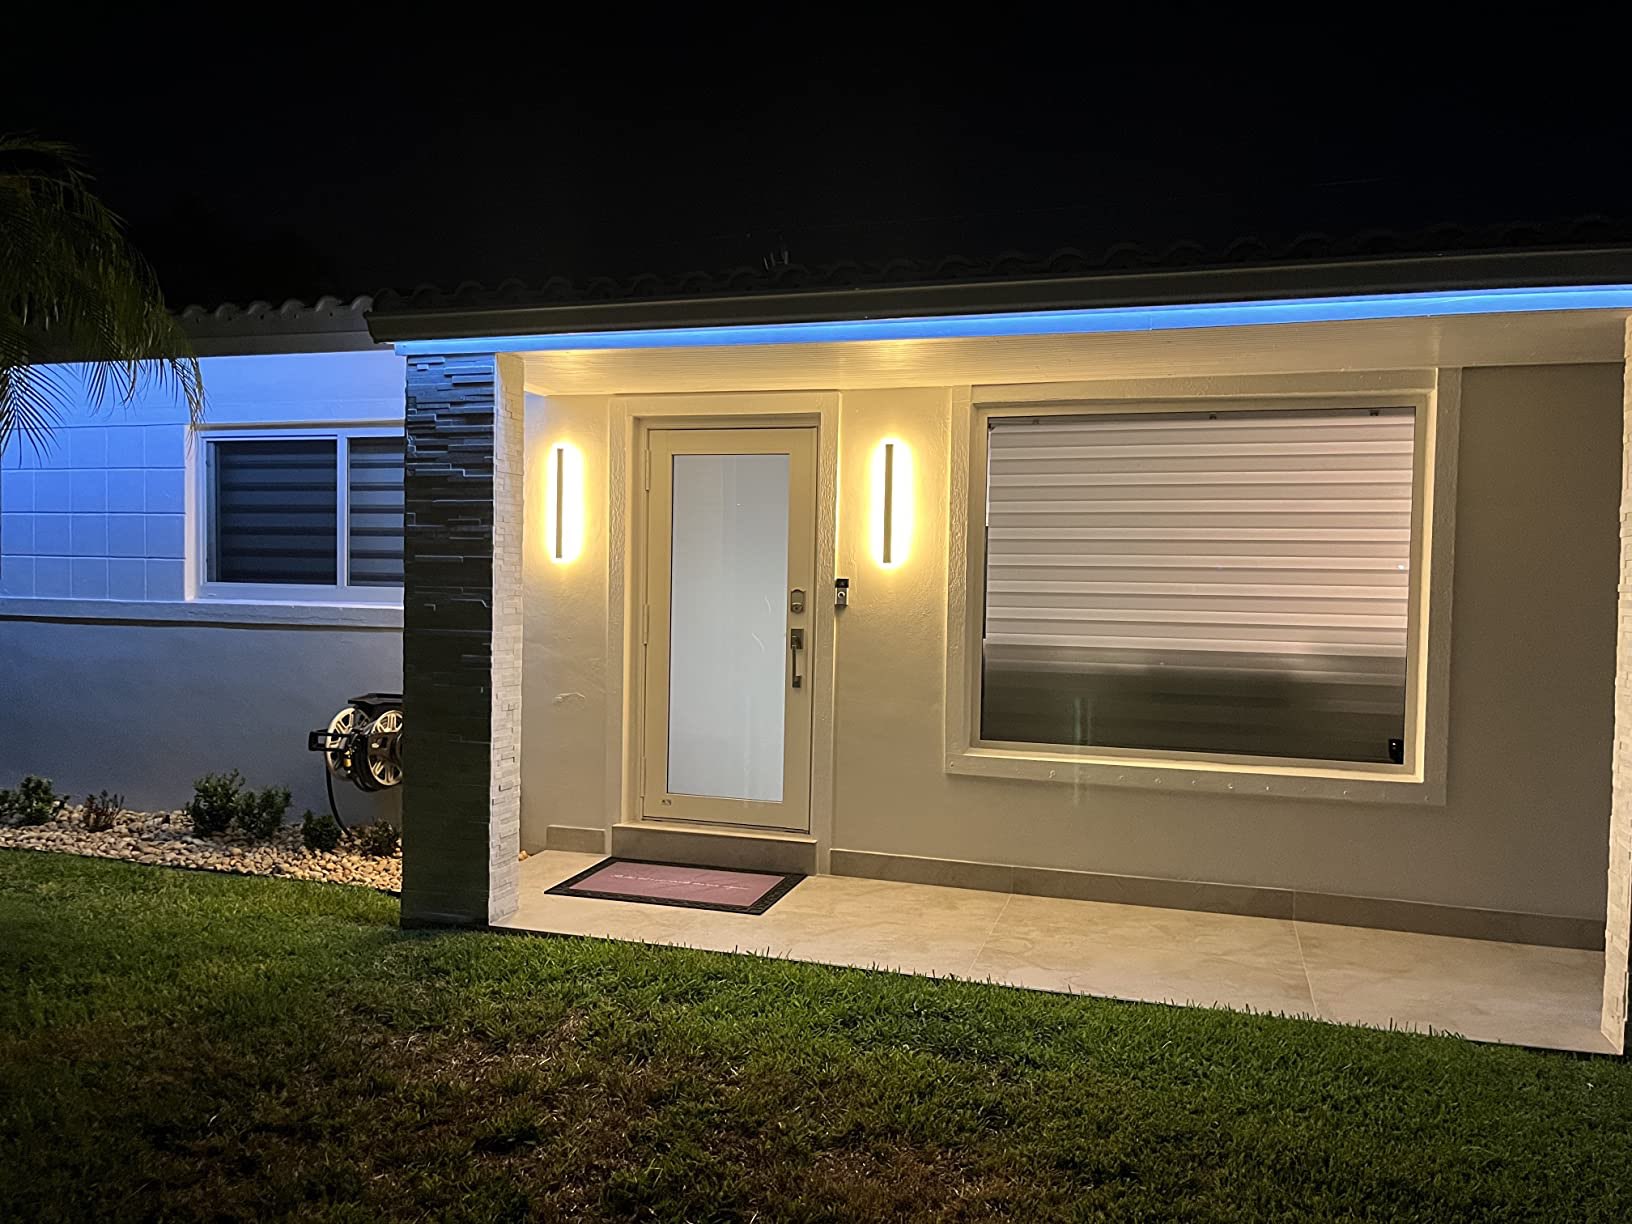 Outdoor LED wall light photo review